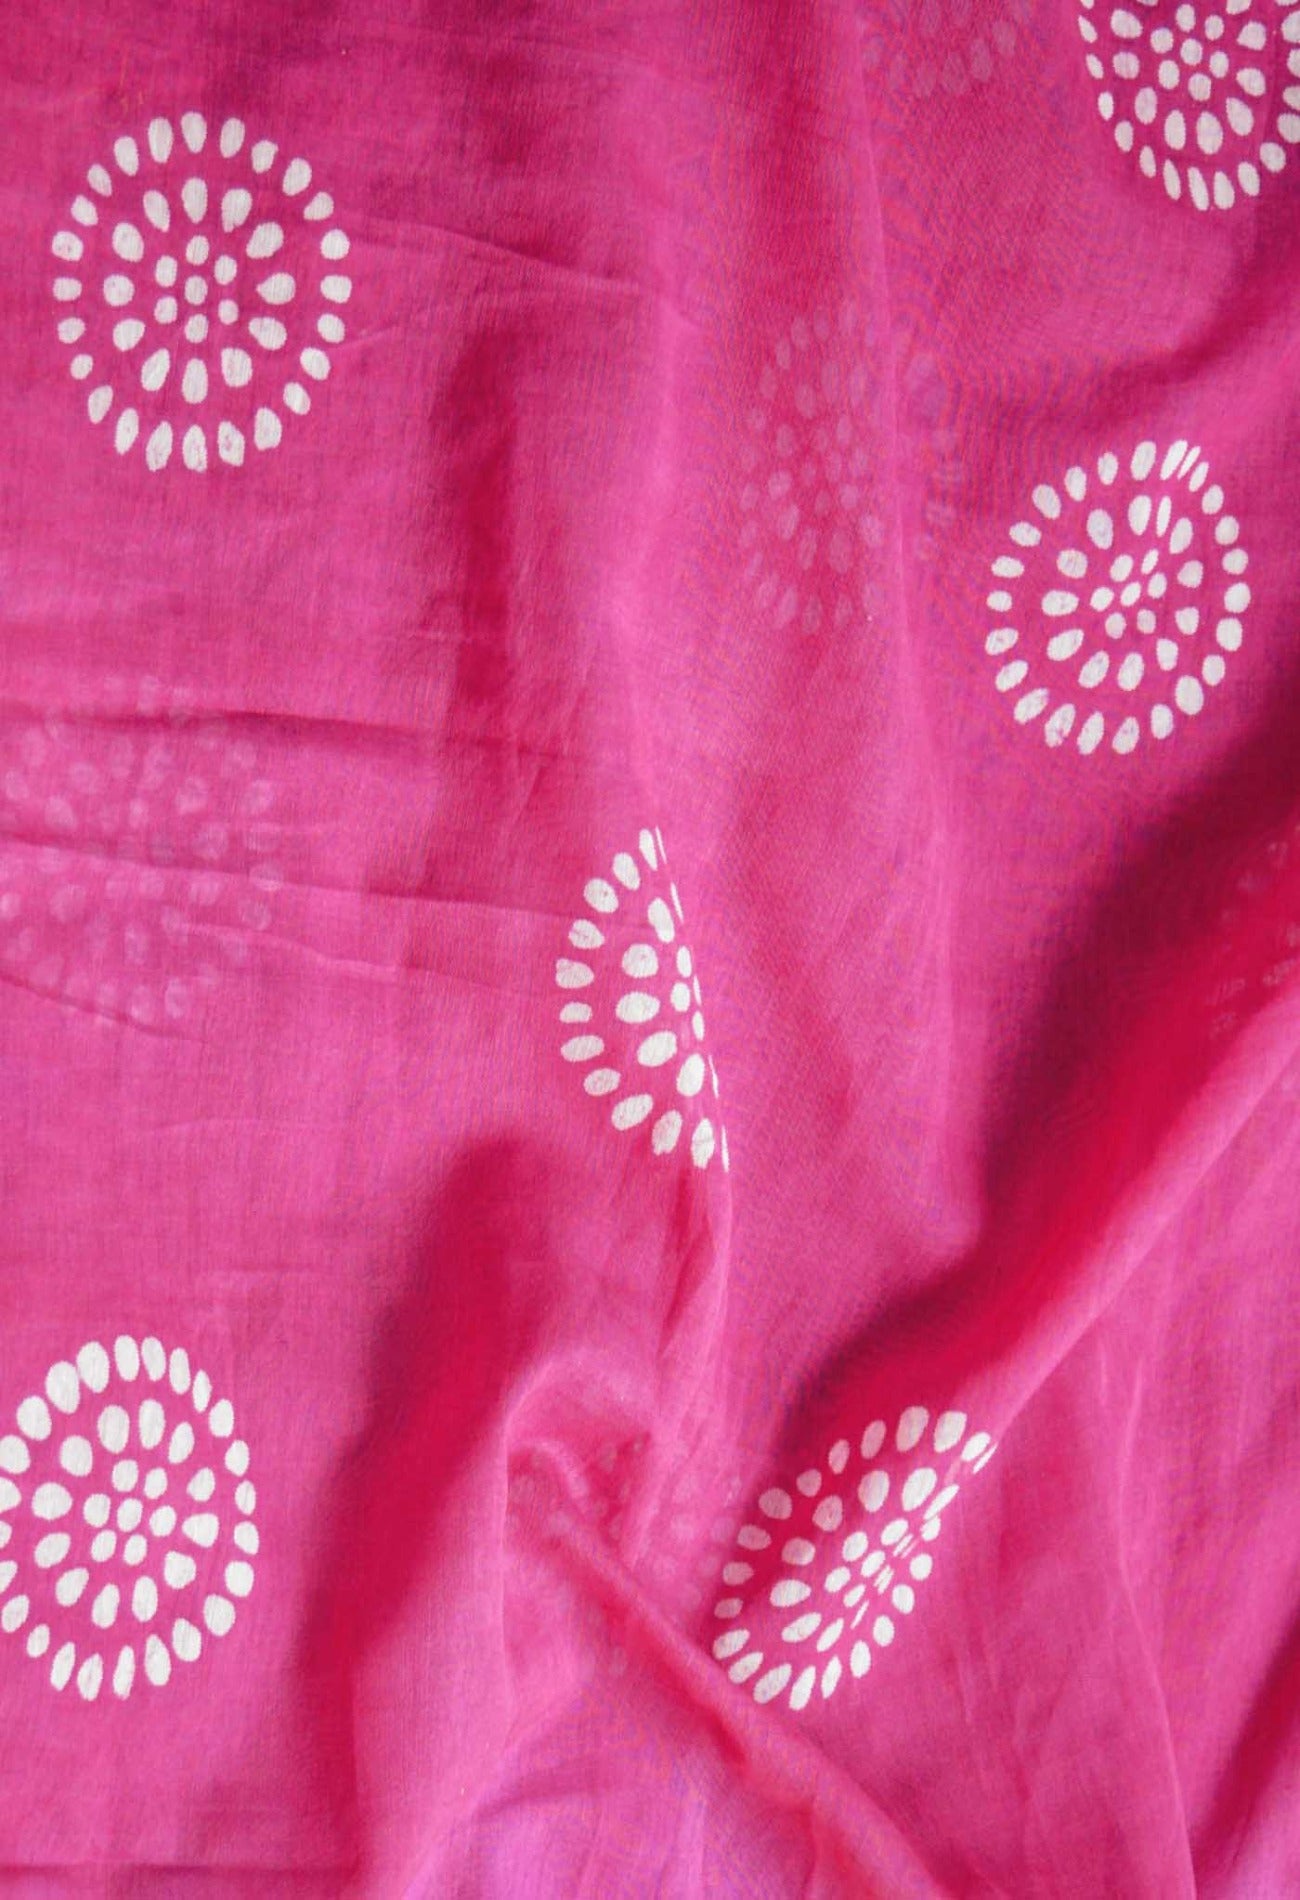 Online Shopping for Pink Pure Wax Batik Chanderi  Cotton Saree with Tie-N-Dye from Rajasthan at Unnatisilks.com India
